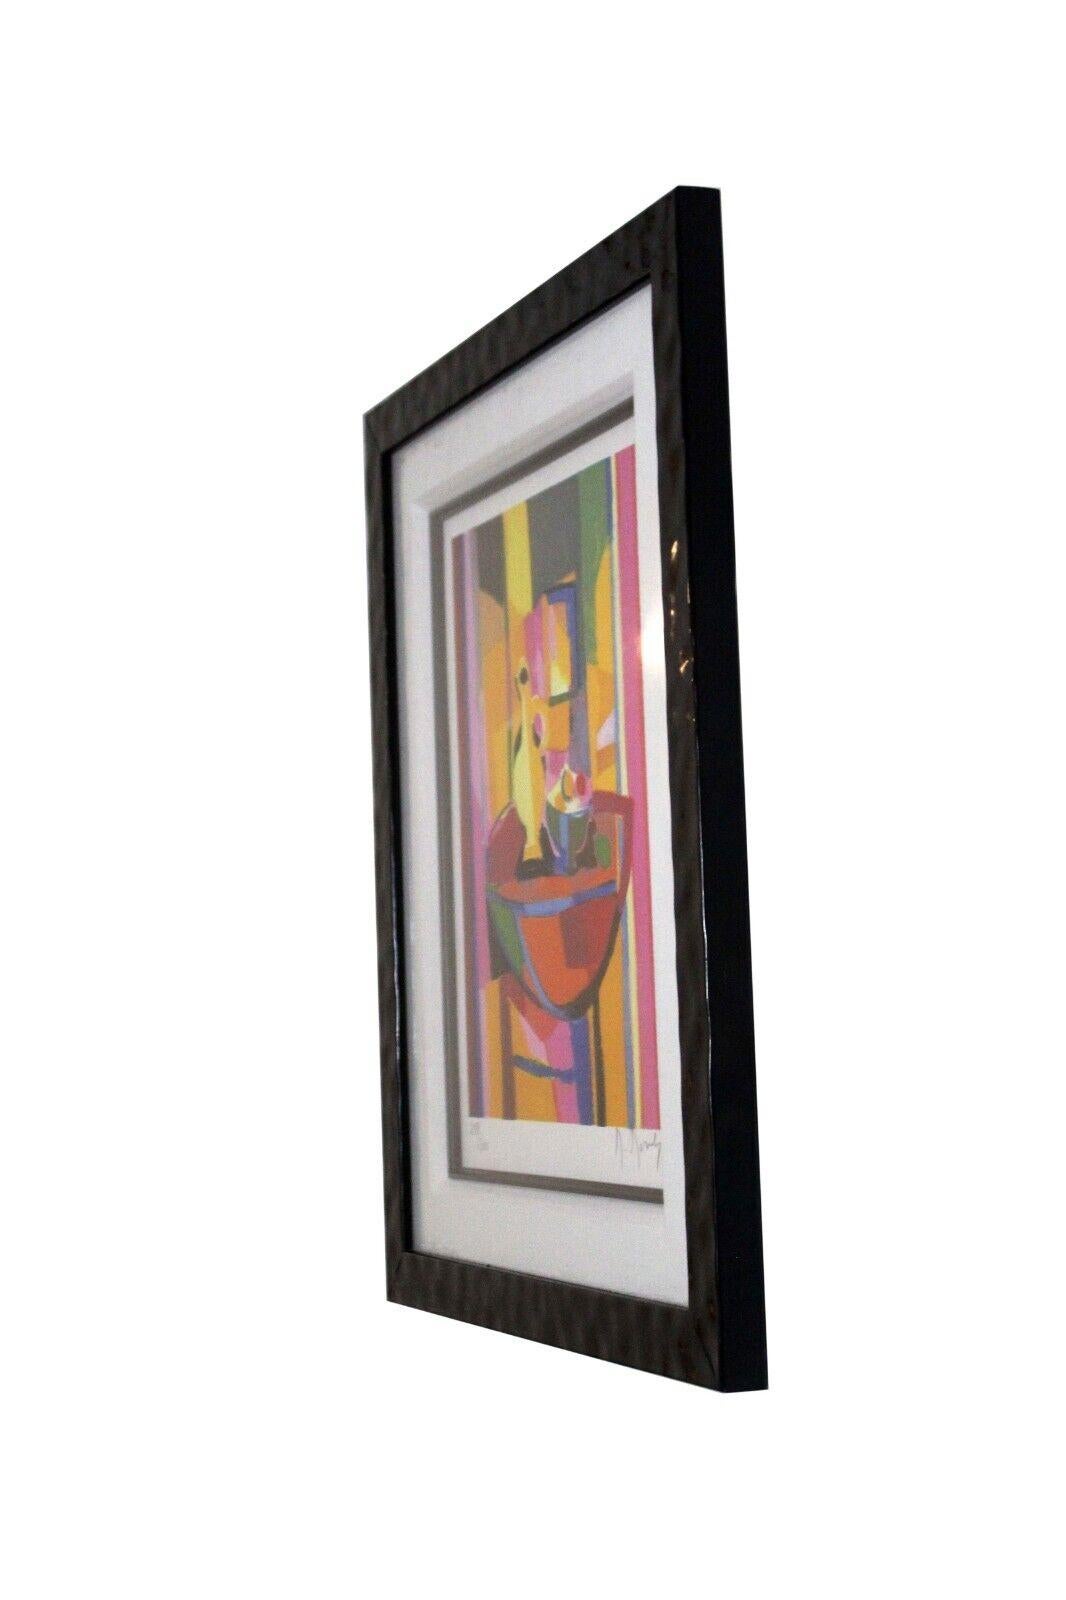 Marcel Mouly Grand Pichet au Gueridon Rouge Signed Lithograph Framed 208/300 6